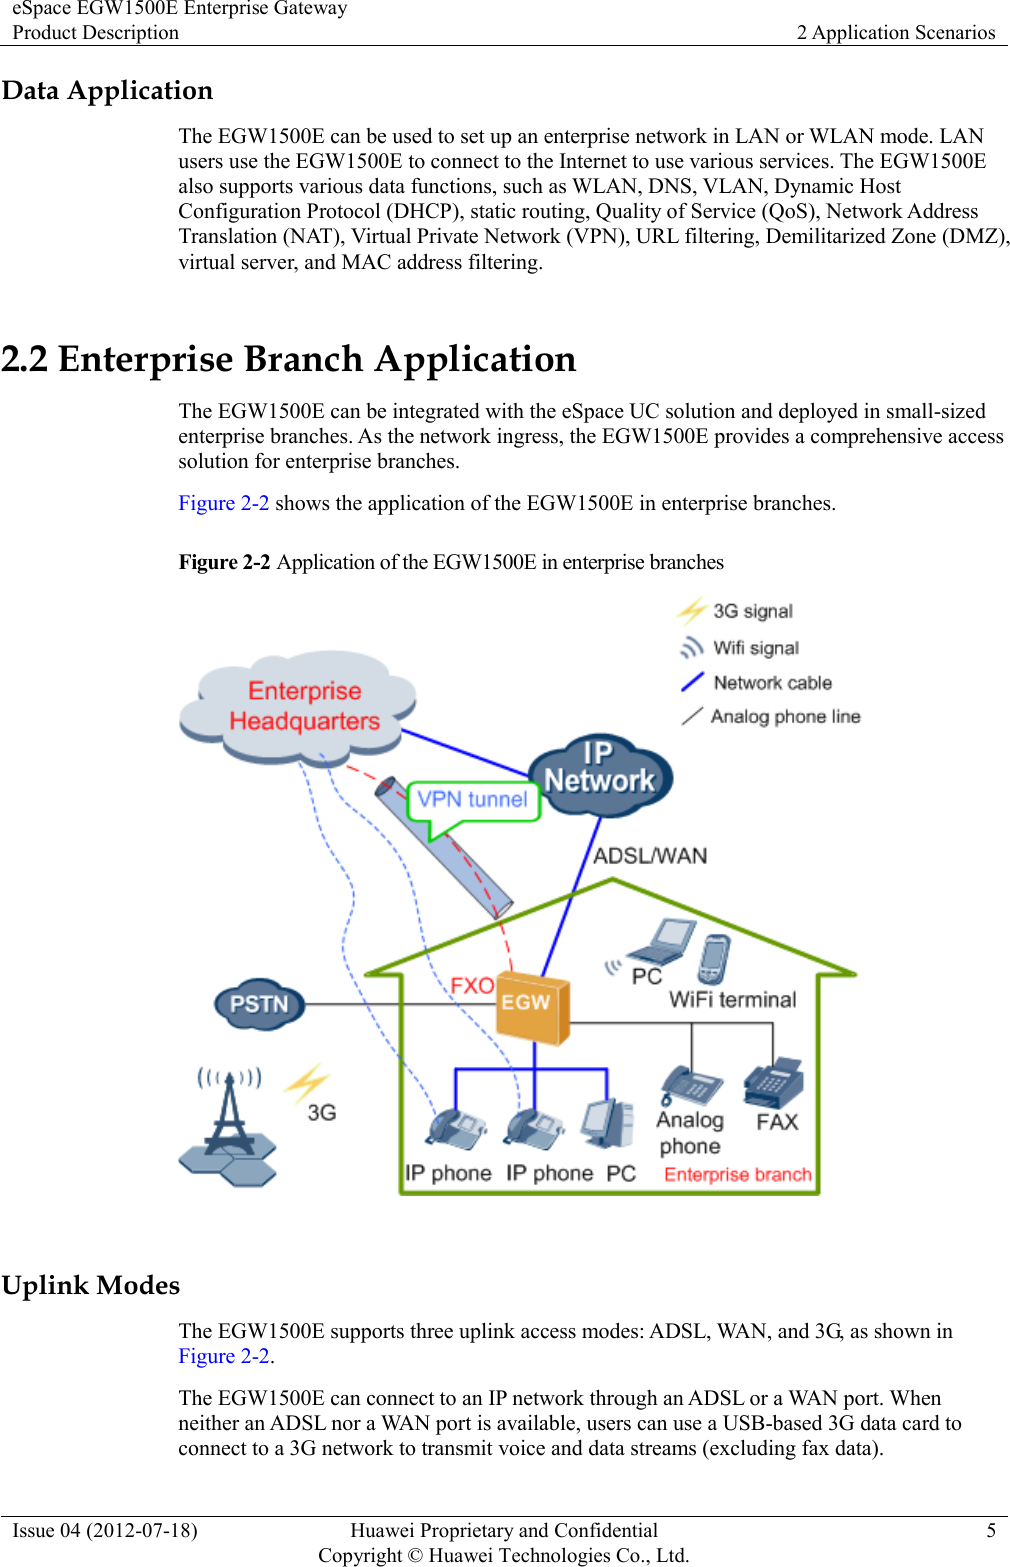 eSpace EGW1500E Enterprise Gateway Product Description 2 Application Scenarios  Issue 04 (2012-07-18) Huawei Proprietary and Confidential                                     Copyright © Huawei Technologies Co., Ltd. 5  Data Application The EGW1500E can be used to set up an enterprise network in LAN or WLAN mode. LAN users use the EGW1500E to connect to the Internet to use various services. The EGW1500E also supports various data functions, such as WLAN, DNS, VLAN, Dynamic Host Configuration Protocol (DHCP), static routing, Quality of Service (QoS), Network Address Translation (NAT), Virtual Private Network (VPN), URL filtering, Demilitarized Zone (DMZ), virtual server, and MAC address filtering. 2.2 Enterprise Branch Application The EGW1500E can be integrated with the eSpace UC solution and deployed in small-sized enterprise branches. As the network ingress, the EGW1500E provides a comprehensive access solution for enterprise branches. Figure 2-2 shows the application of the EGW1500E in enterprise branches. Figure 2-2 Application of the EGW1500E in enterprise branches   Uplink Modes The EGW1500E supports three uplink access modes: ADSL, WAN, and 3G, as shown in Figure 2-2. The EGW1500E can connect to an IP network through an ADSL or a WAN port. When neither an ADSL nor a WAN port is available, users can use a USB-based 3G data card to connect to a 3G network to transmit voice and data streams (excluding fax data). 